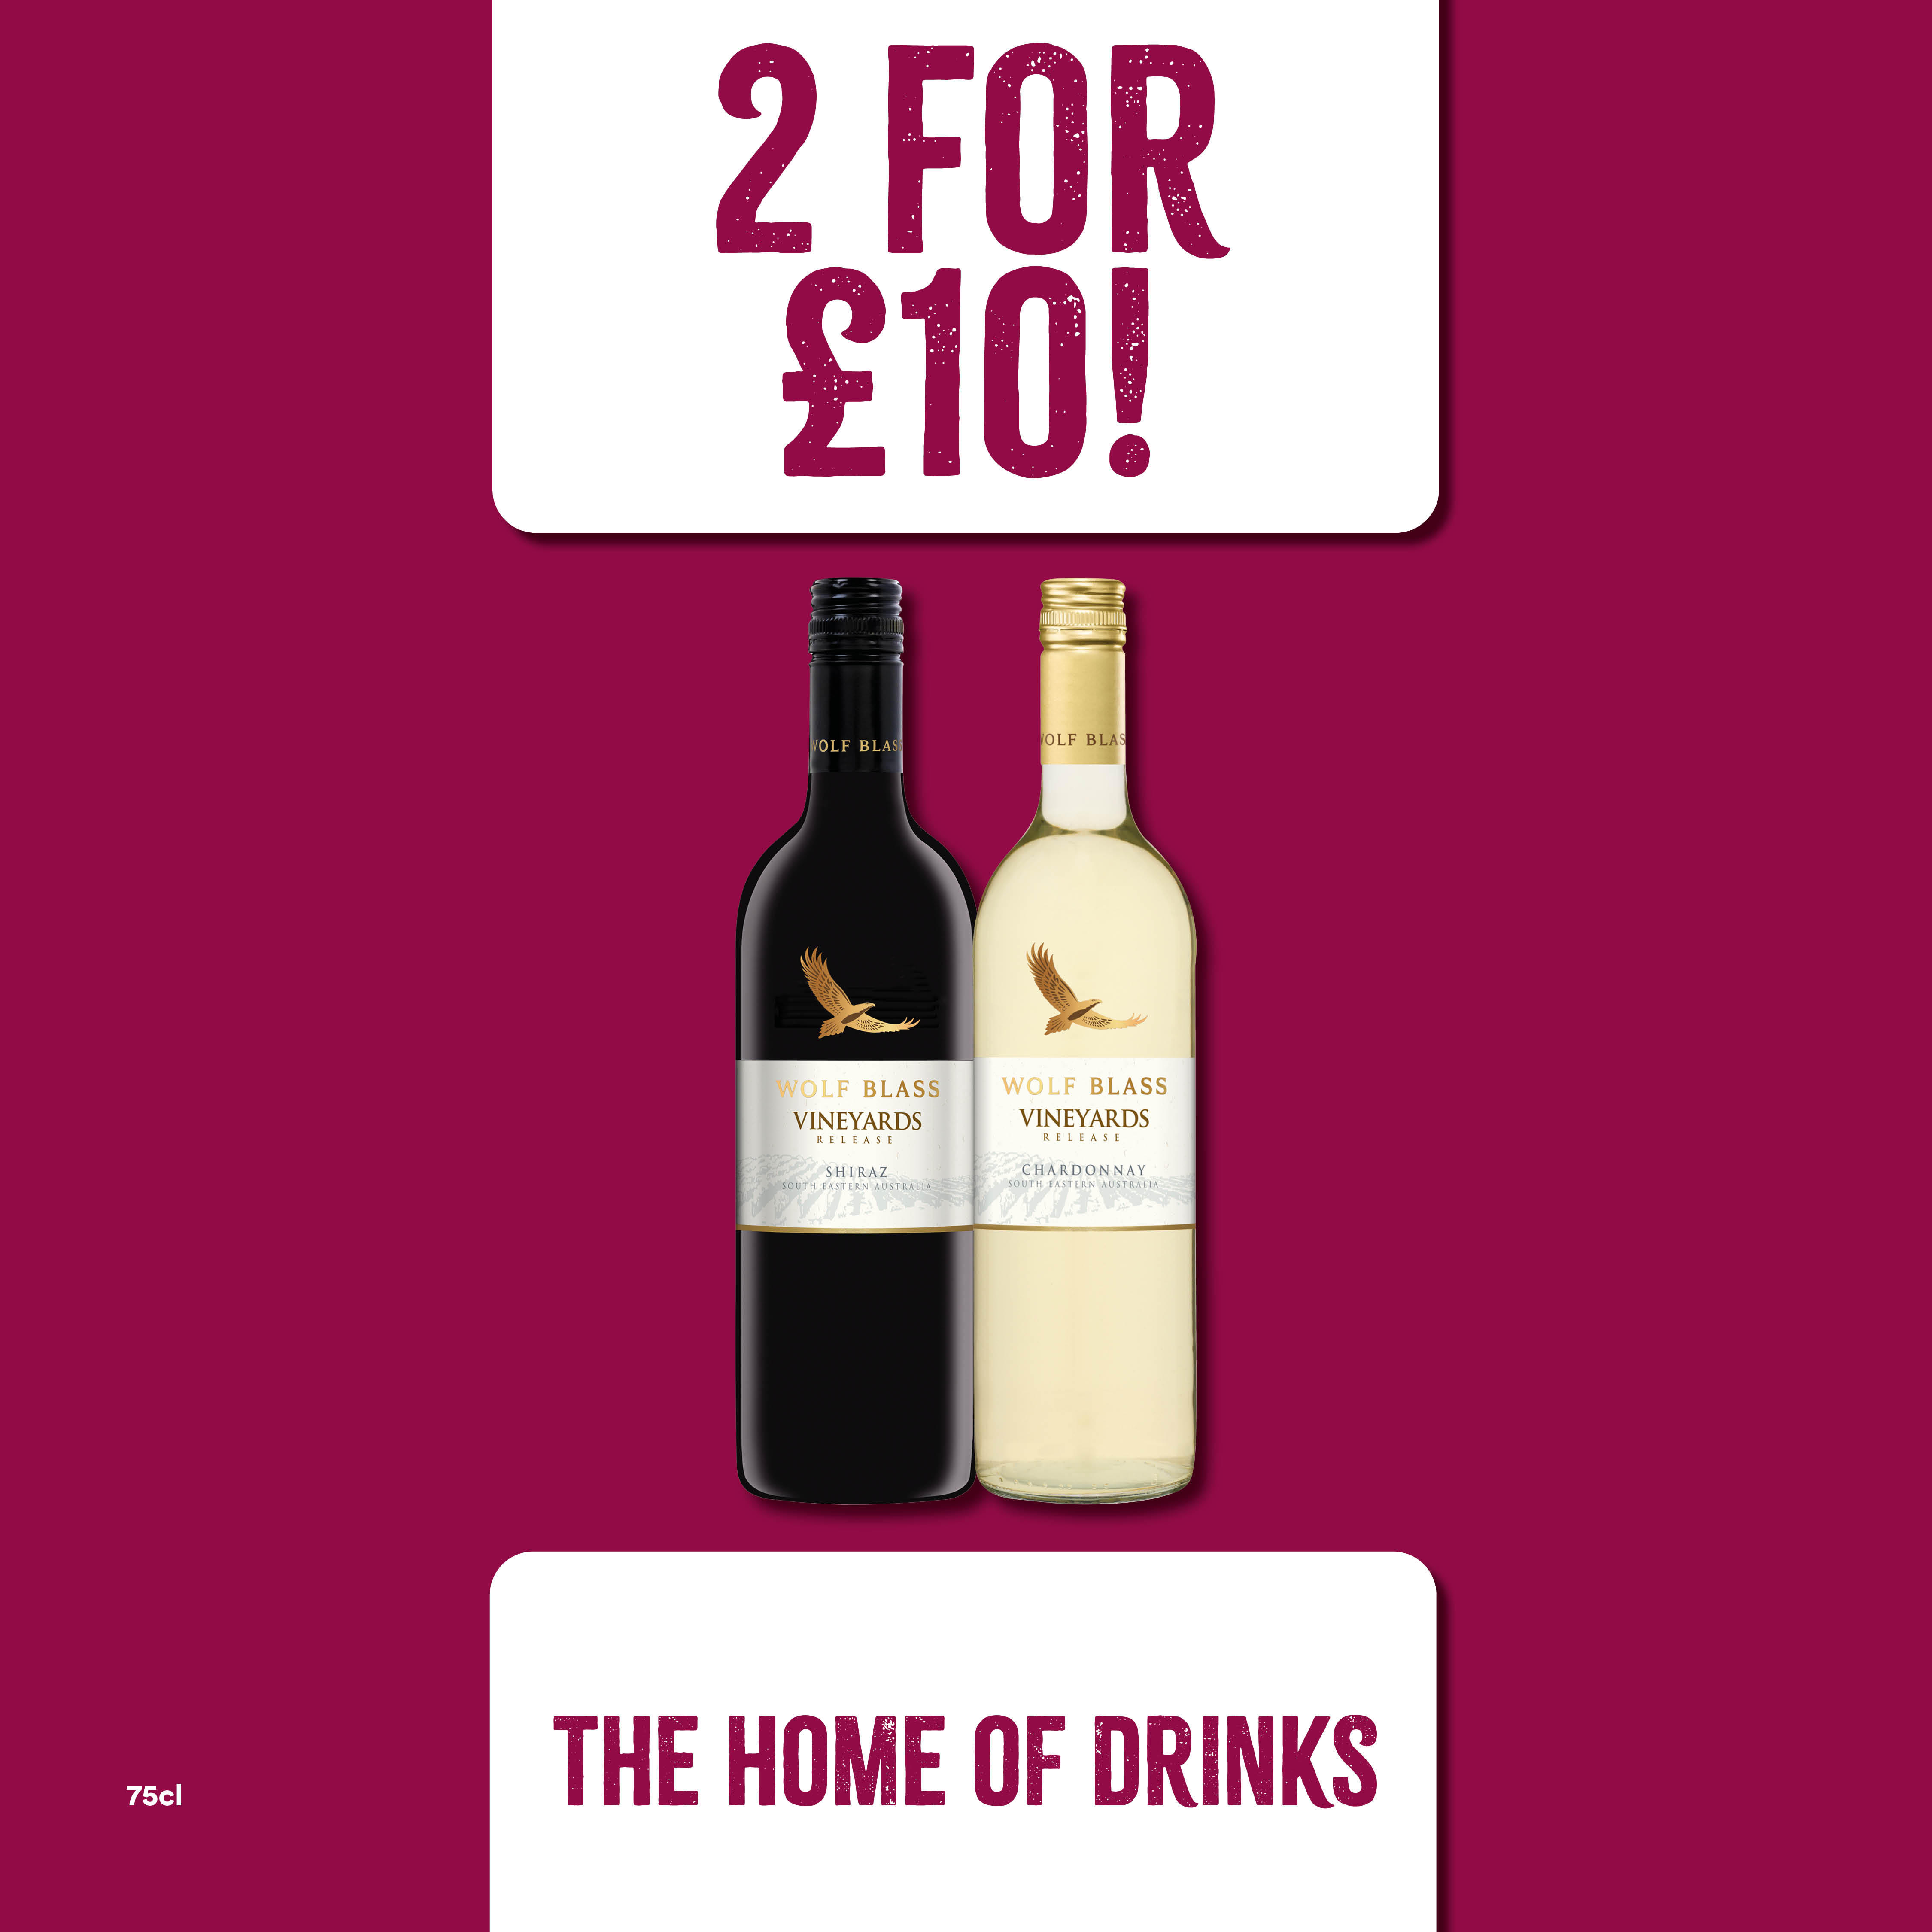 2 for £10 Wolfblass vineyards Bargain Booze Select Convenience Laugharne 01994 426984